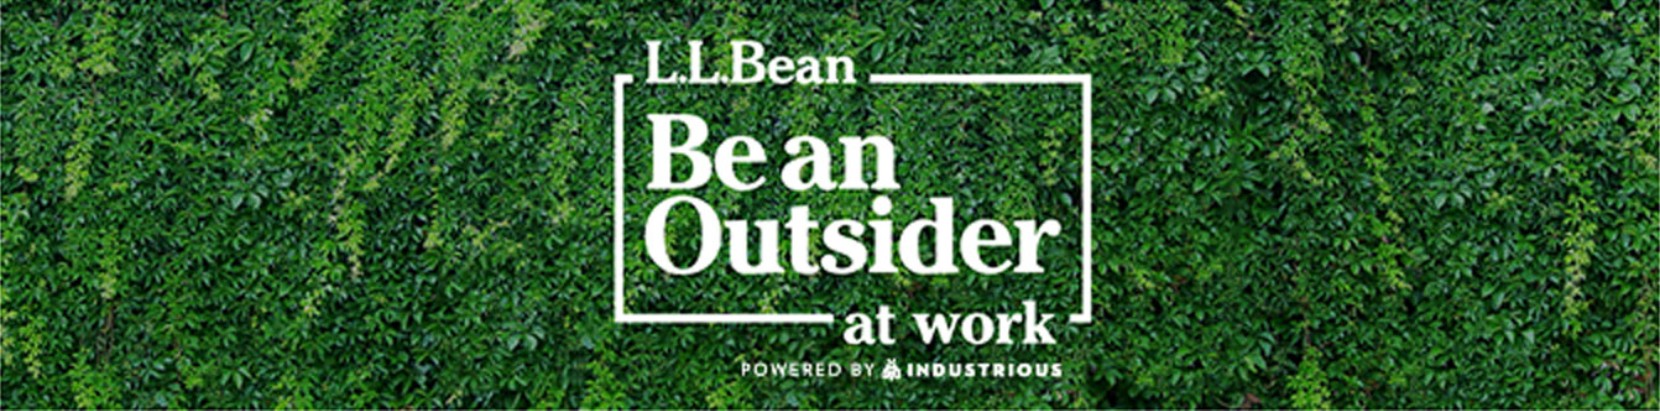 L.L.Bean Be an Outsider at Work